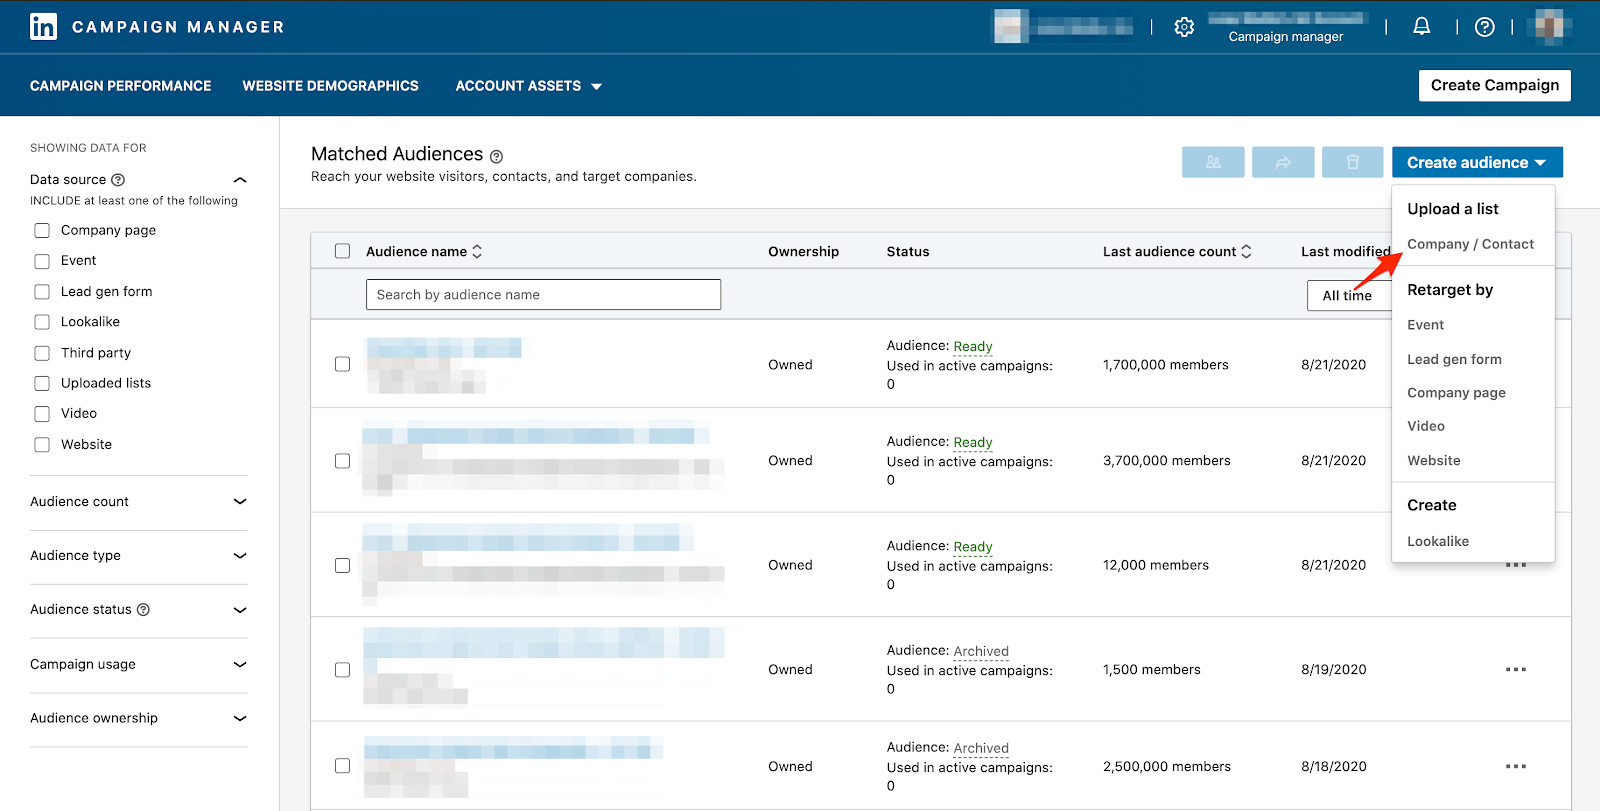 Screenshot of the 'Company / Contact' selection of the "Create Audience" dropdown of LinkedIn's Campaign Manager.